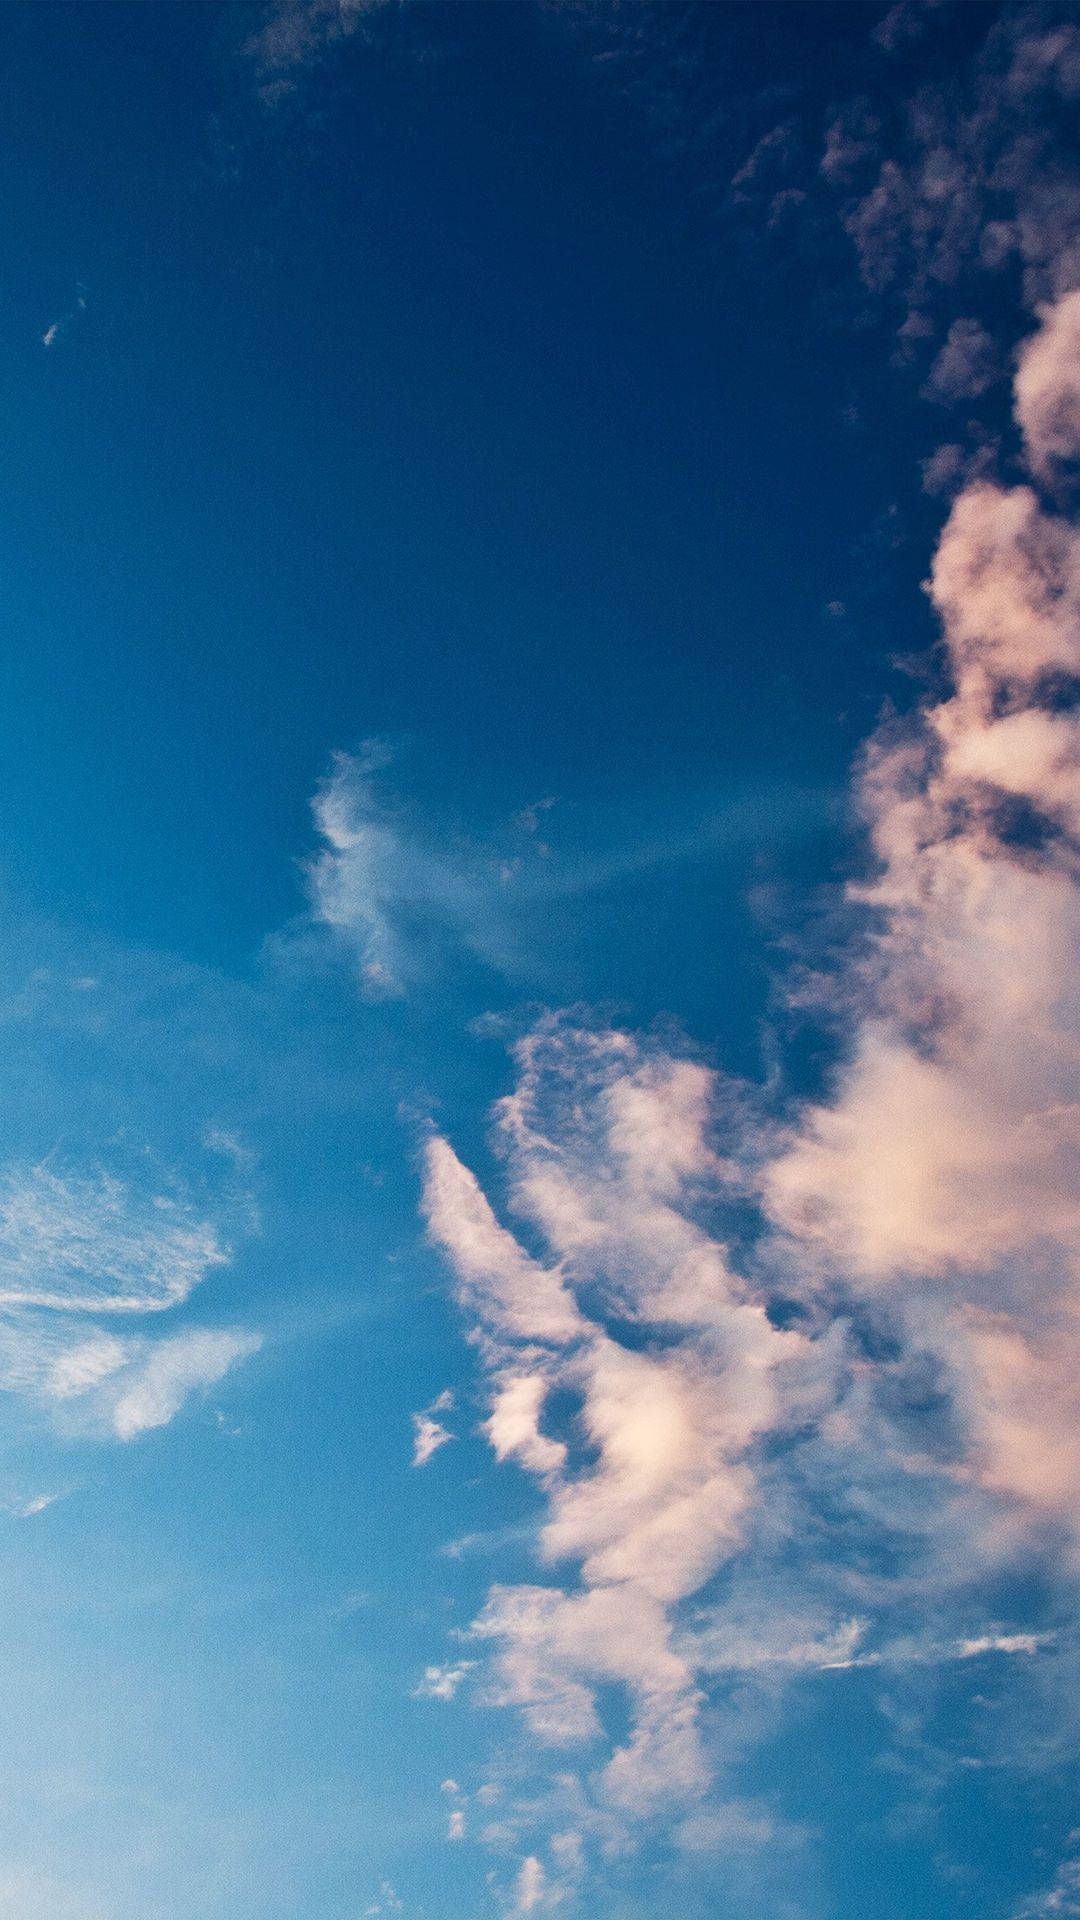 Blue Sky With Soft Clouds Wallpaper